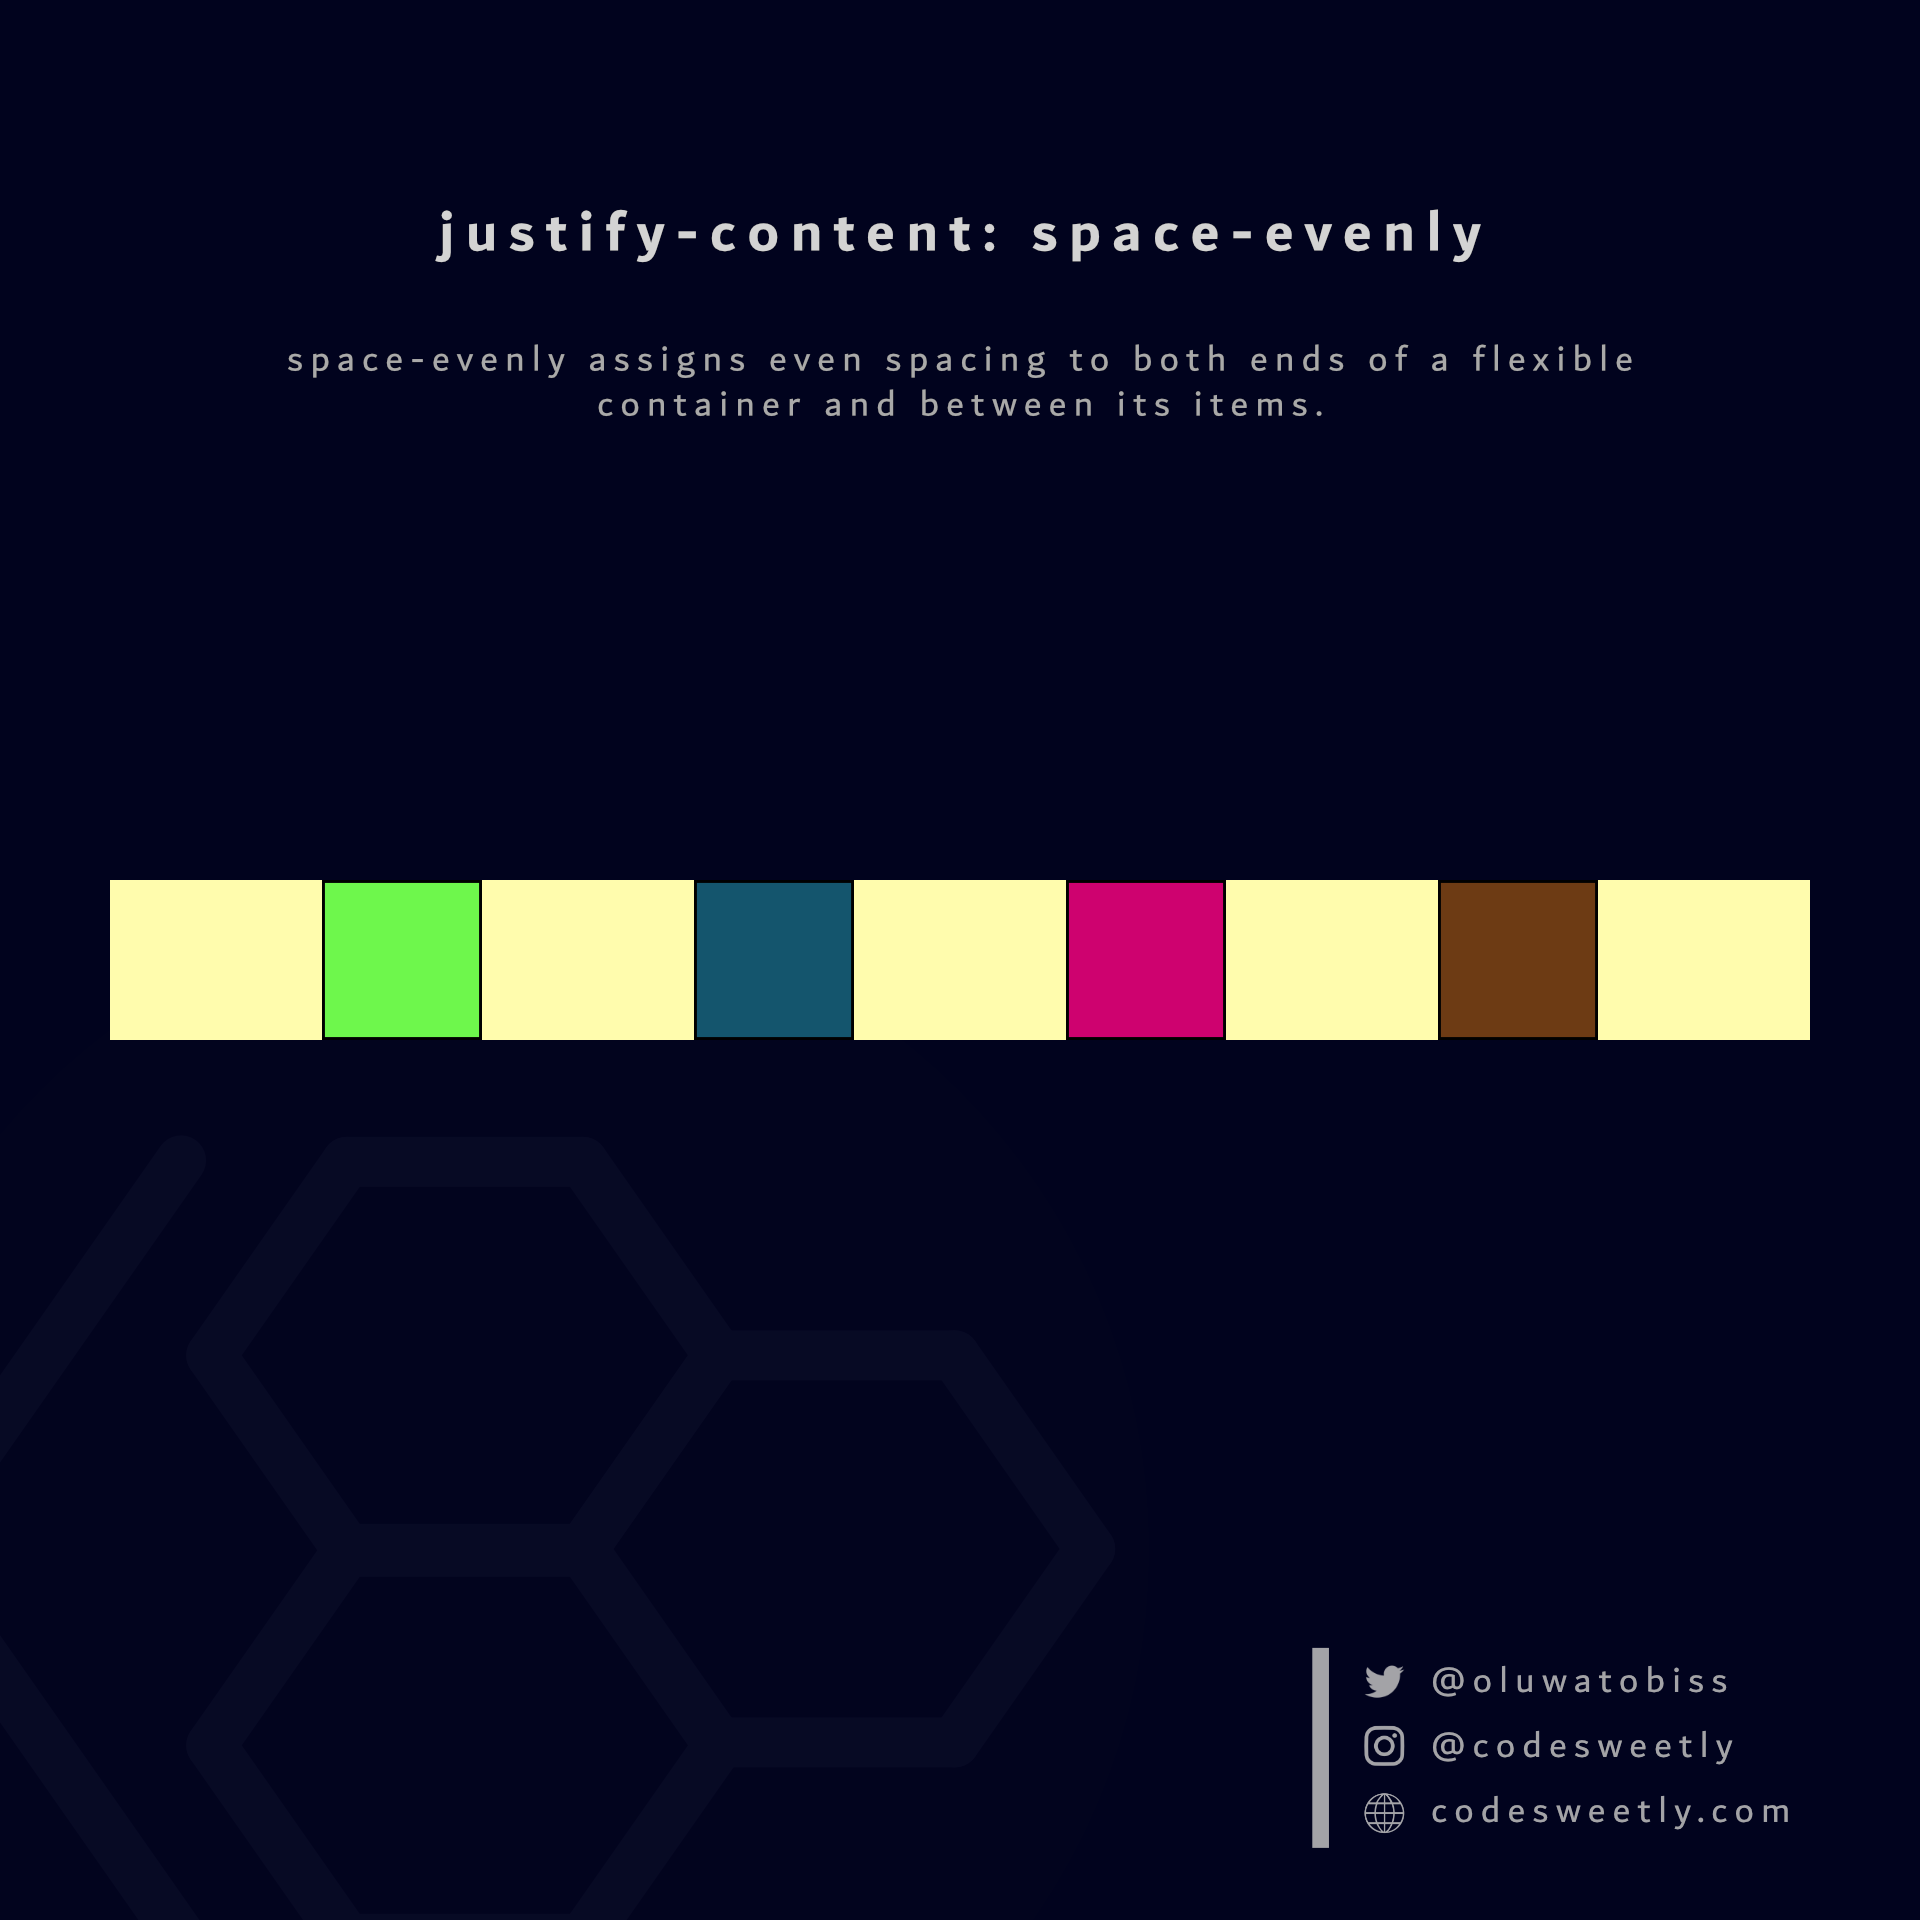 Illustration of justify-content&#39;s space-evenly value